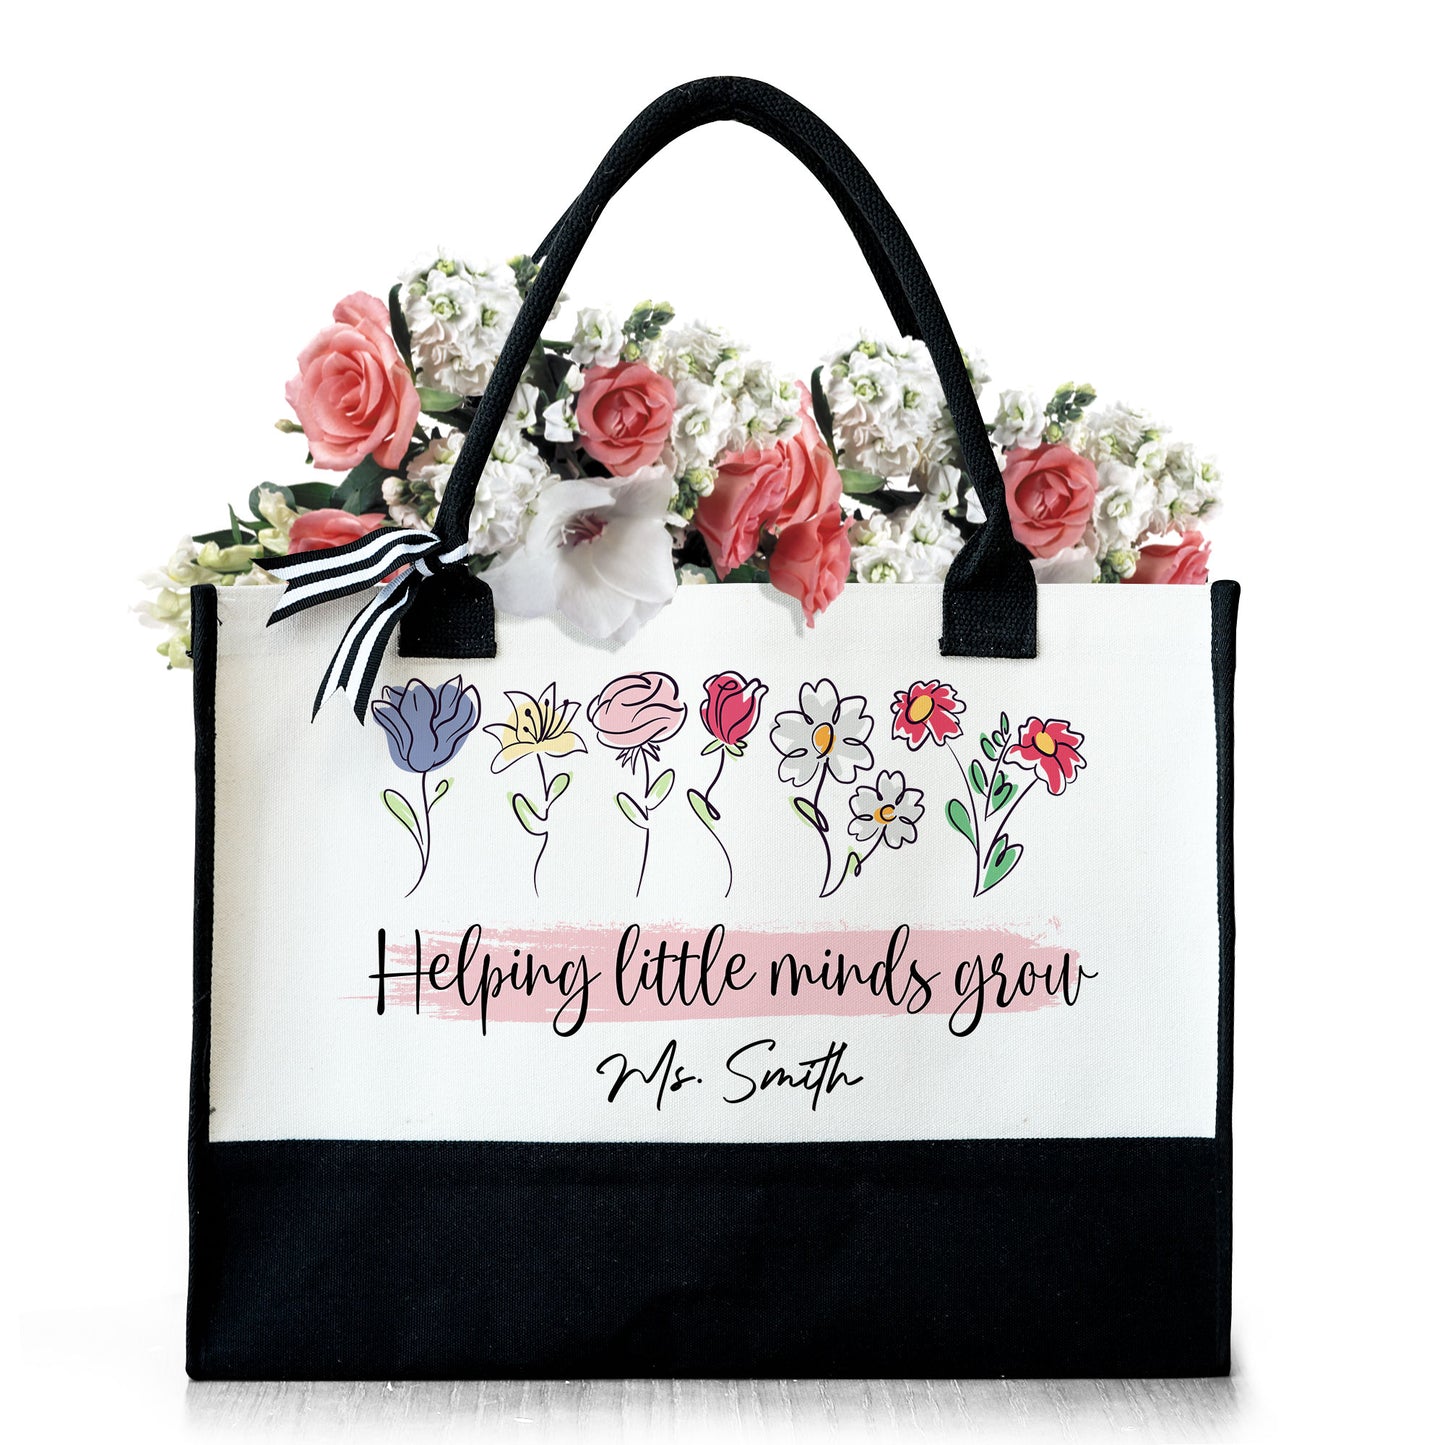 Helping Little Minds Grow - Personalized Canvas Tote Bag